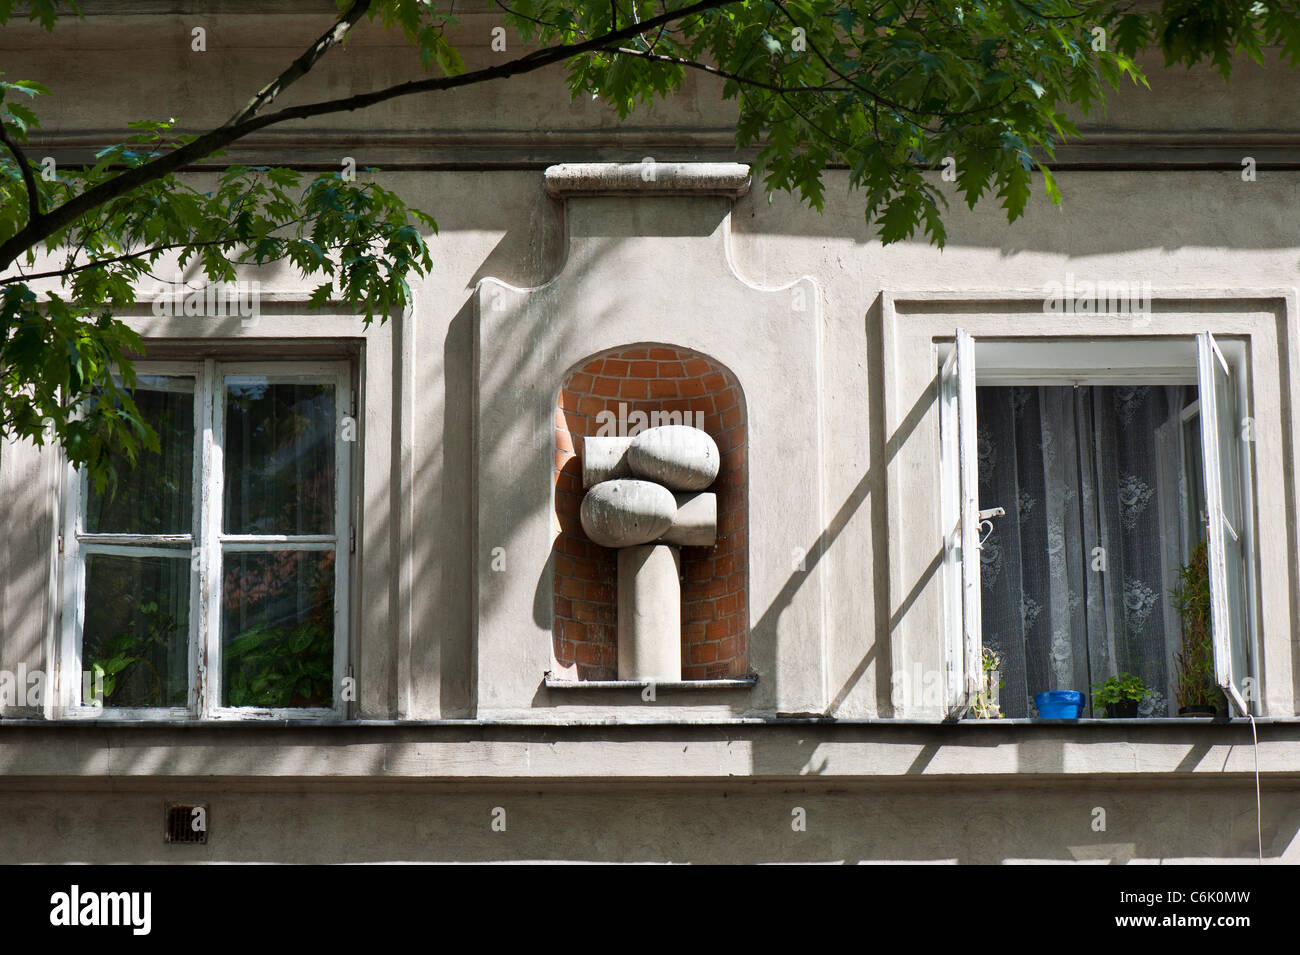 Modern art design on building wall, Old Town, Warsaw, Poland Stock Photo